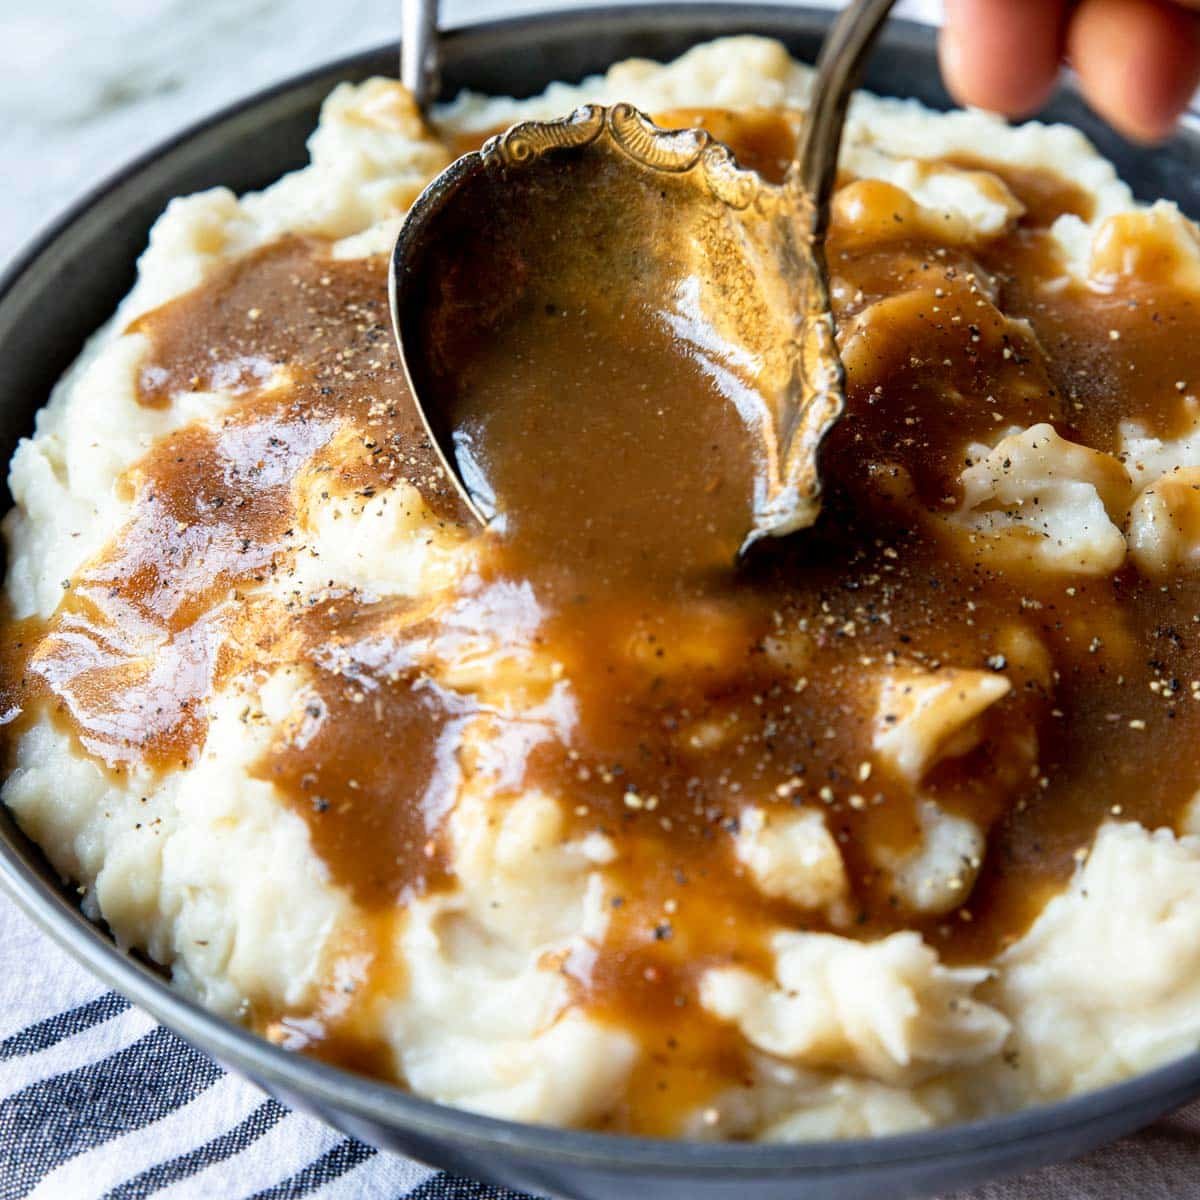 brown gravy being ladled over mashed potatoes